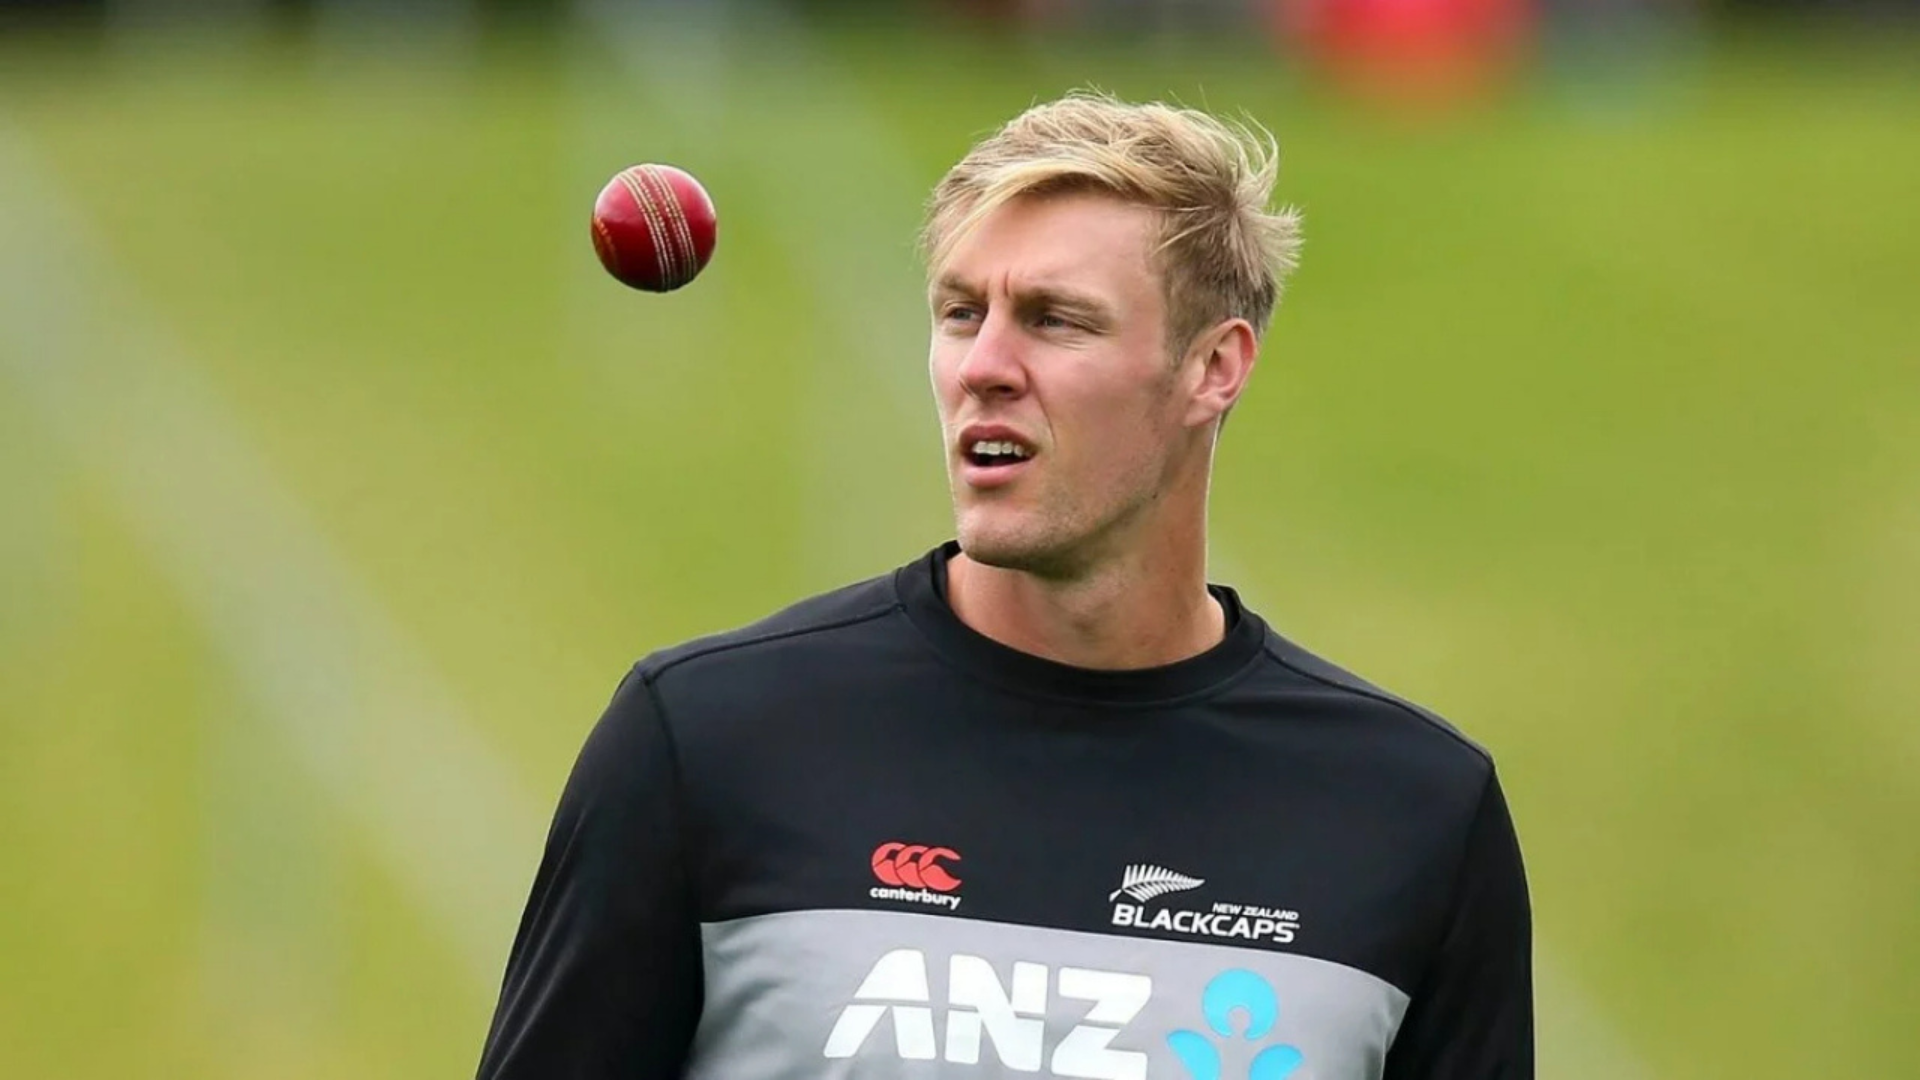 Kyle Jamieson, a pacer from New Zealand, will miss the remaining matches against Bangladesh